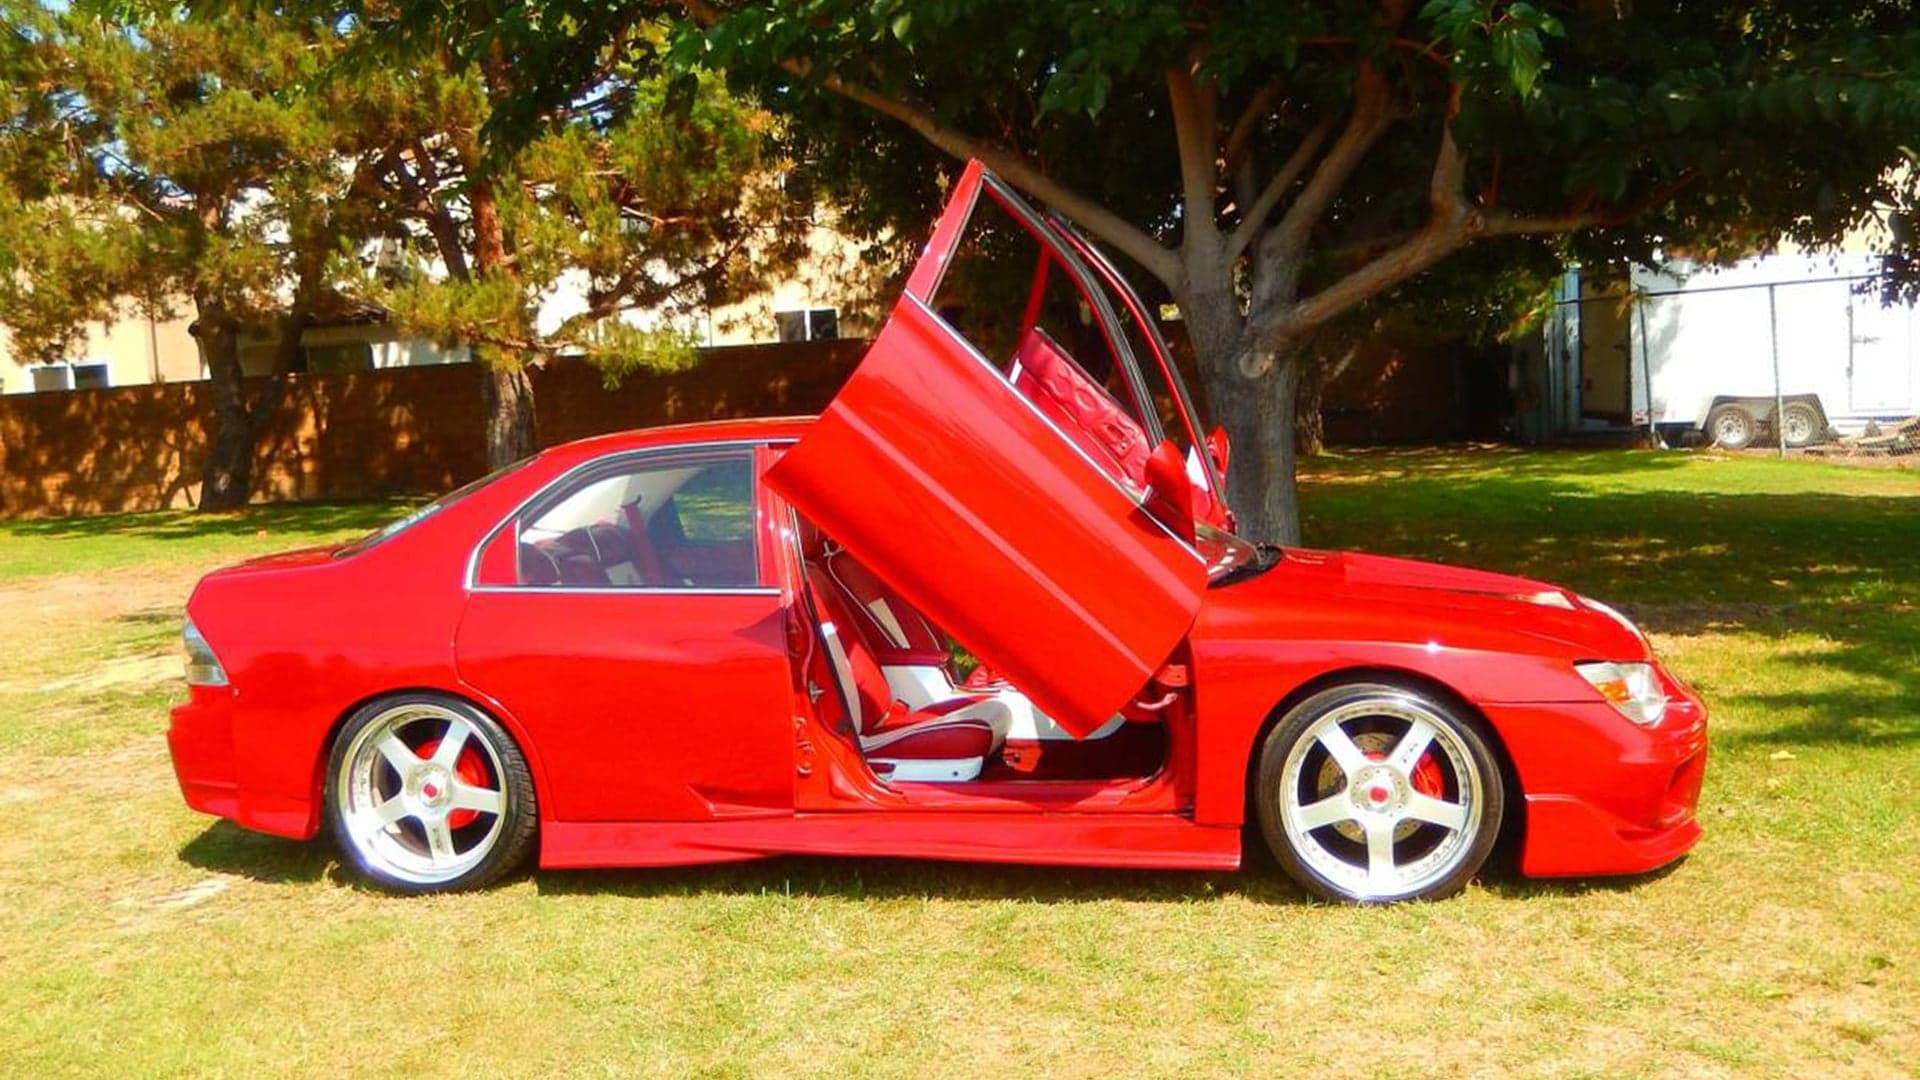 There’s a Great Red Dragon on the Hood of This Craigslist 1994 Honda Accord